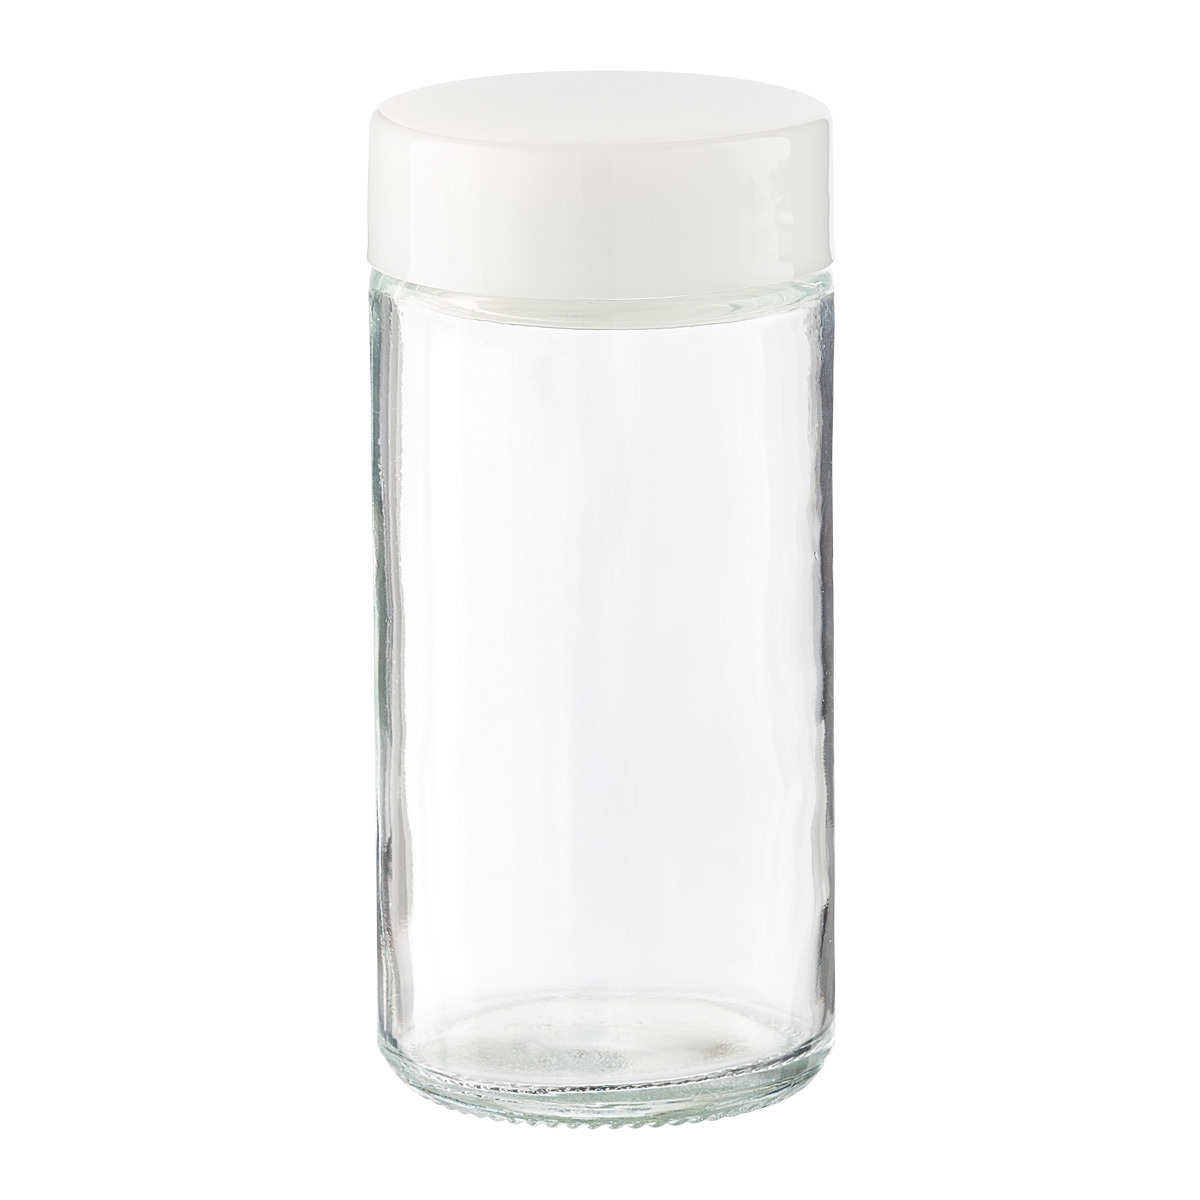 https://www.containerstore.com/catalogimages/433250/10085716_3_Oz_Spice_Bottle_With_Whit.jpg